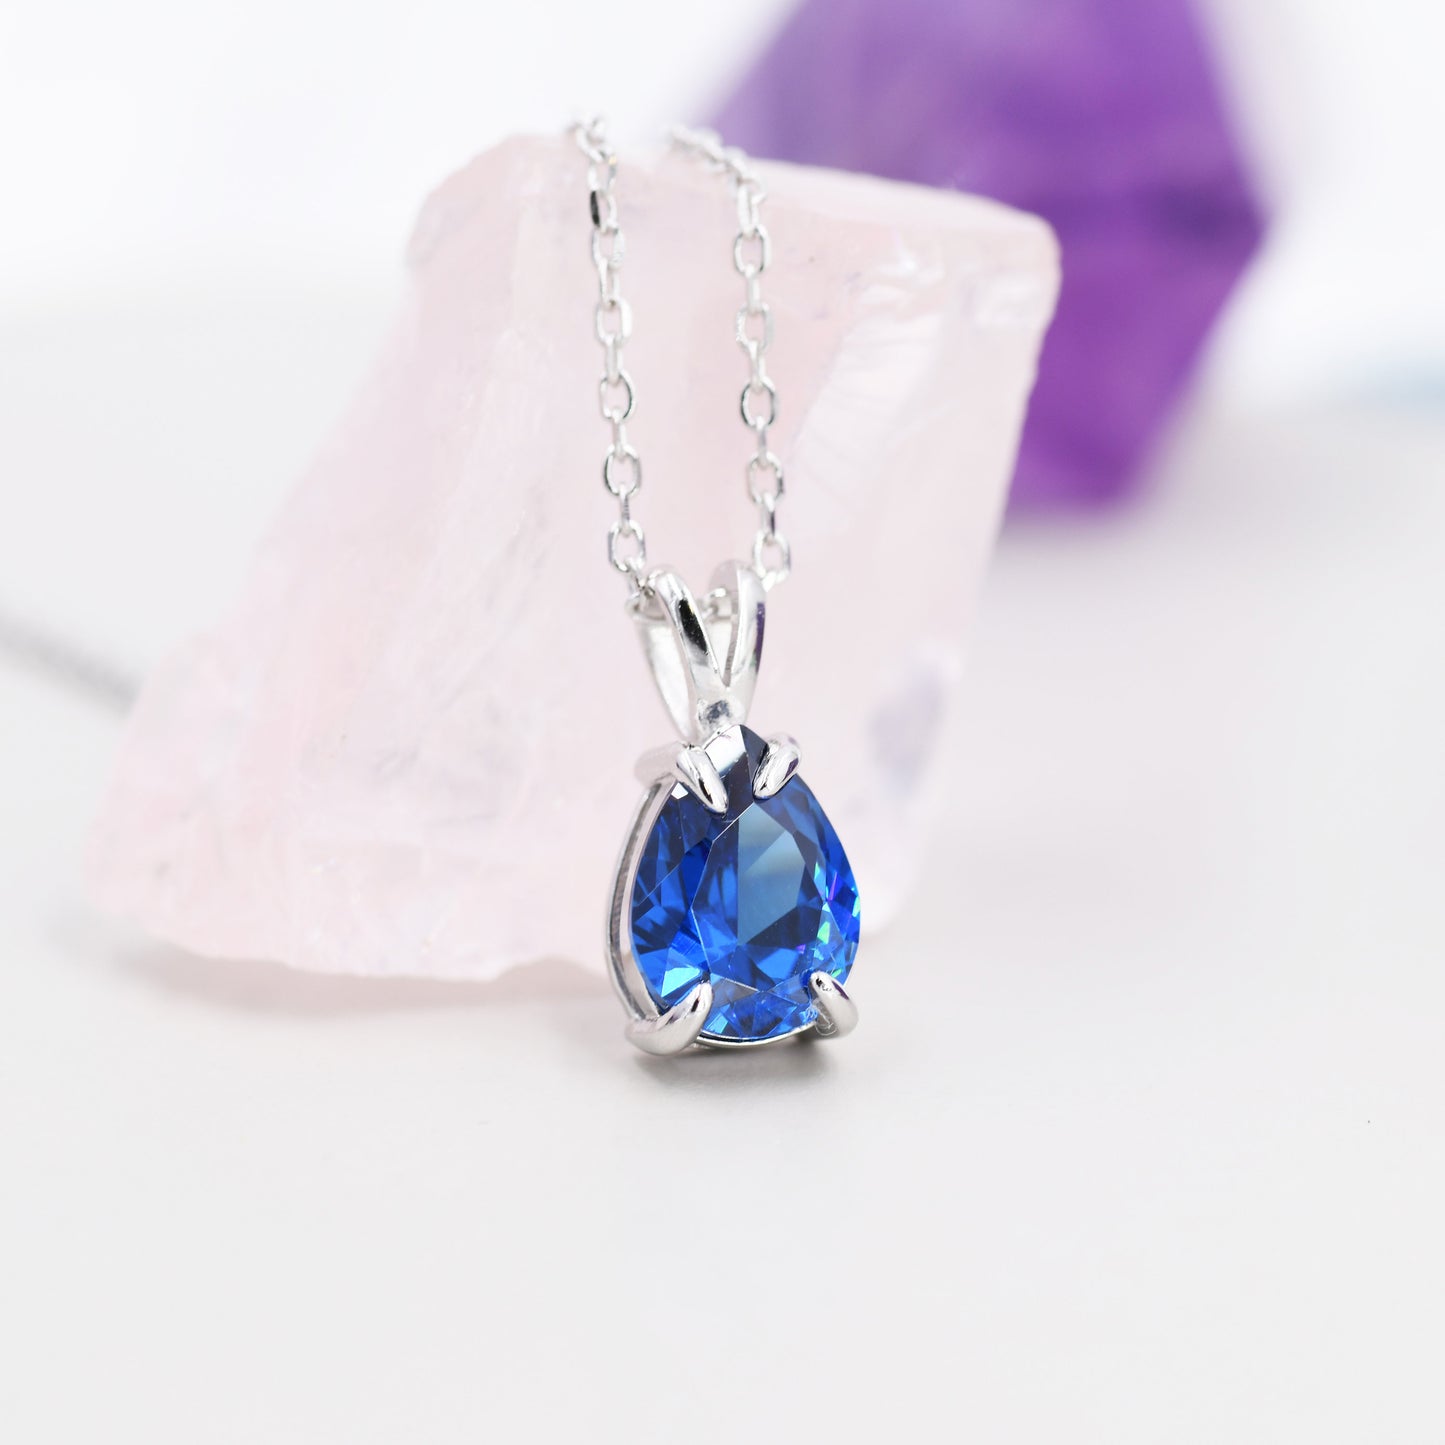 Sapphire Blue Pear Cut CZ Necklace in Sterling Silver, 7 x 9mm, Blue Droplet necklace, Diamond CZ, September Birthstone